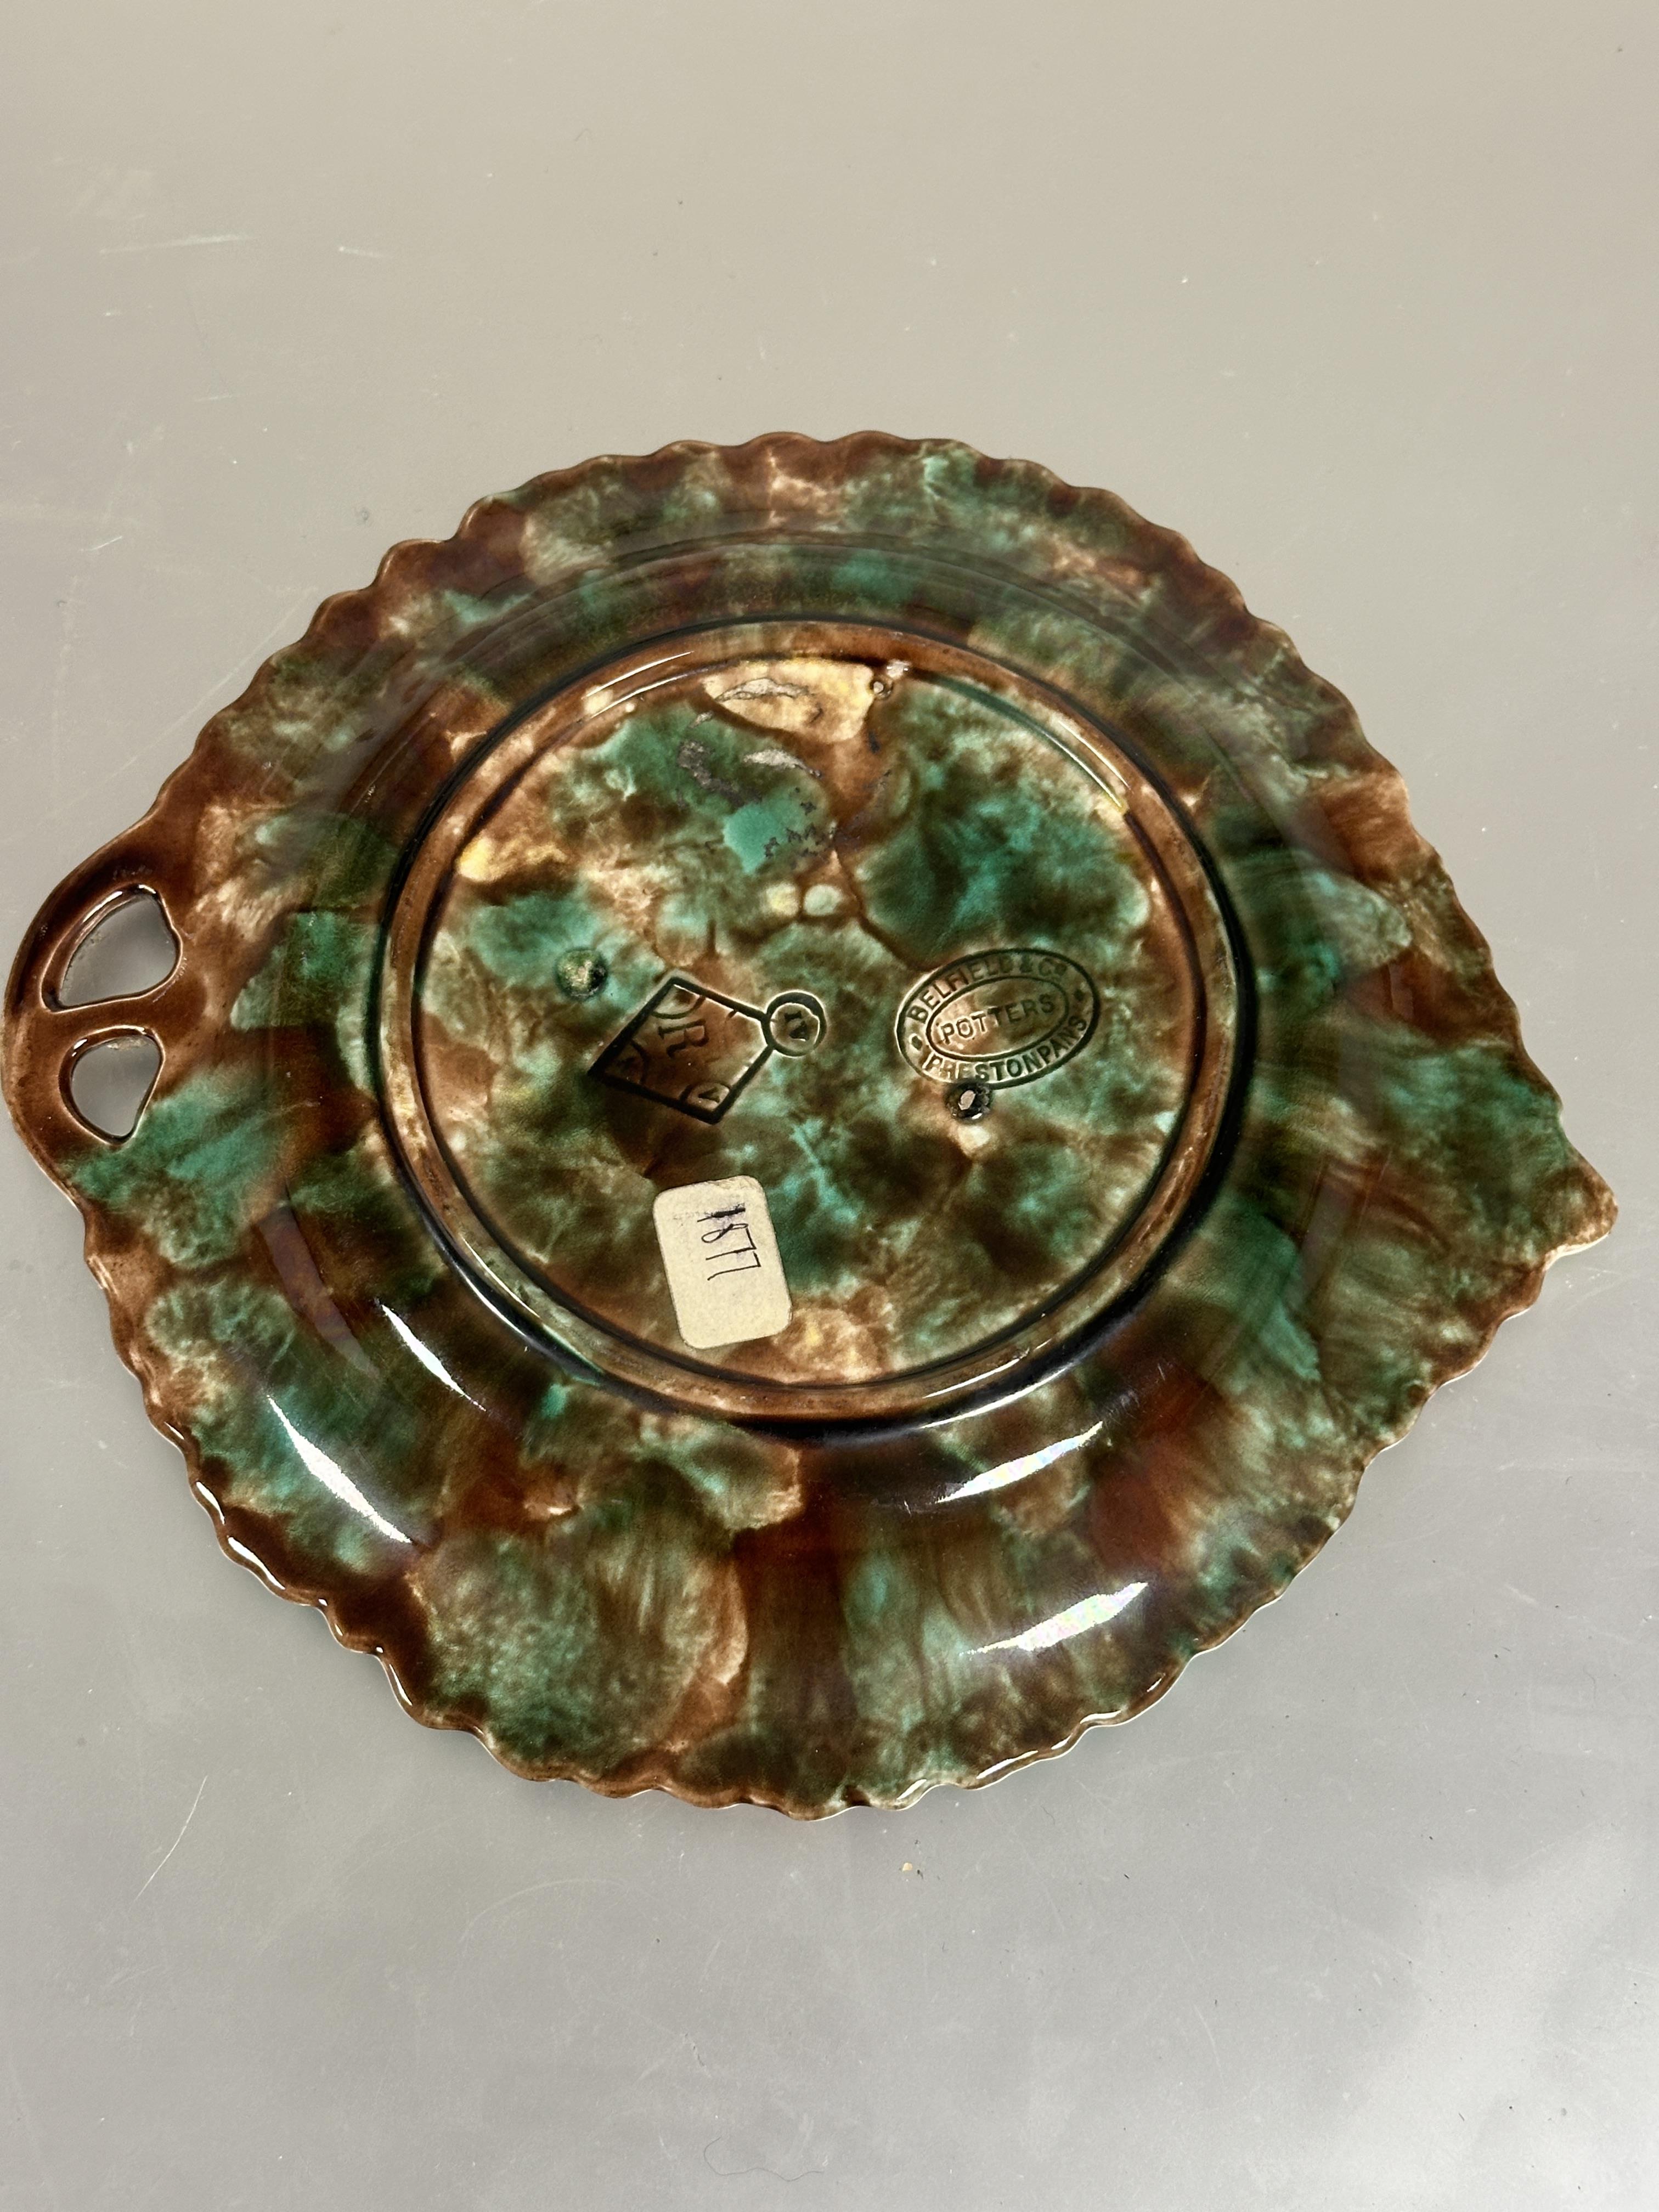 A Belfield & Co Prestonpans pottery majolica leaf moulded handled fruit dish with green and brown - Image 2 of 10